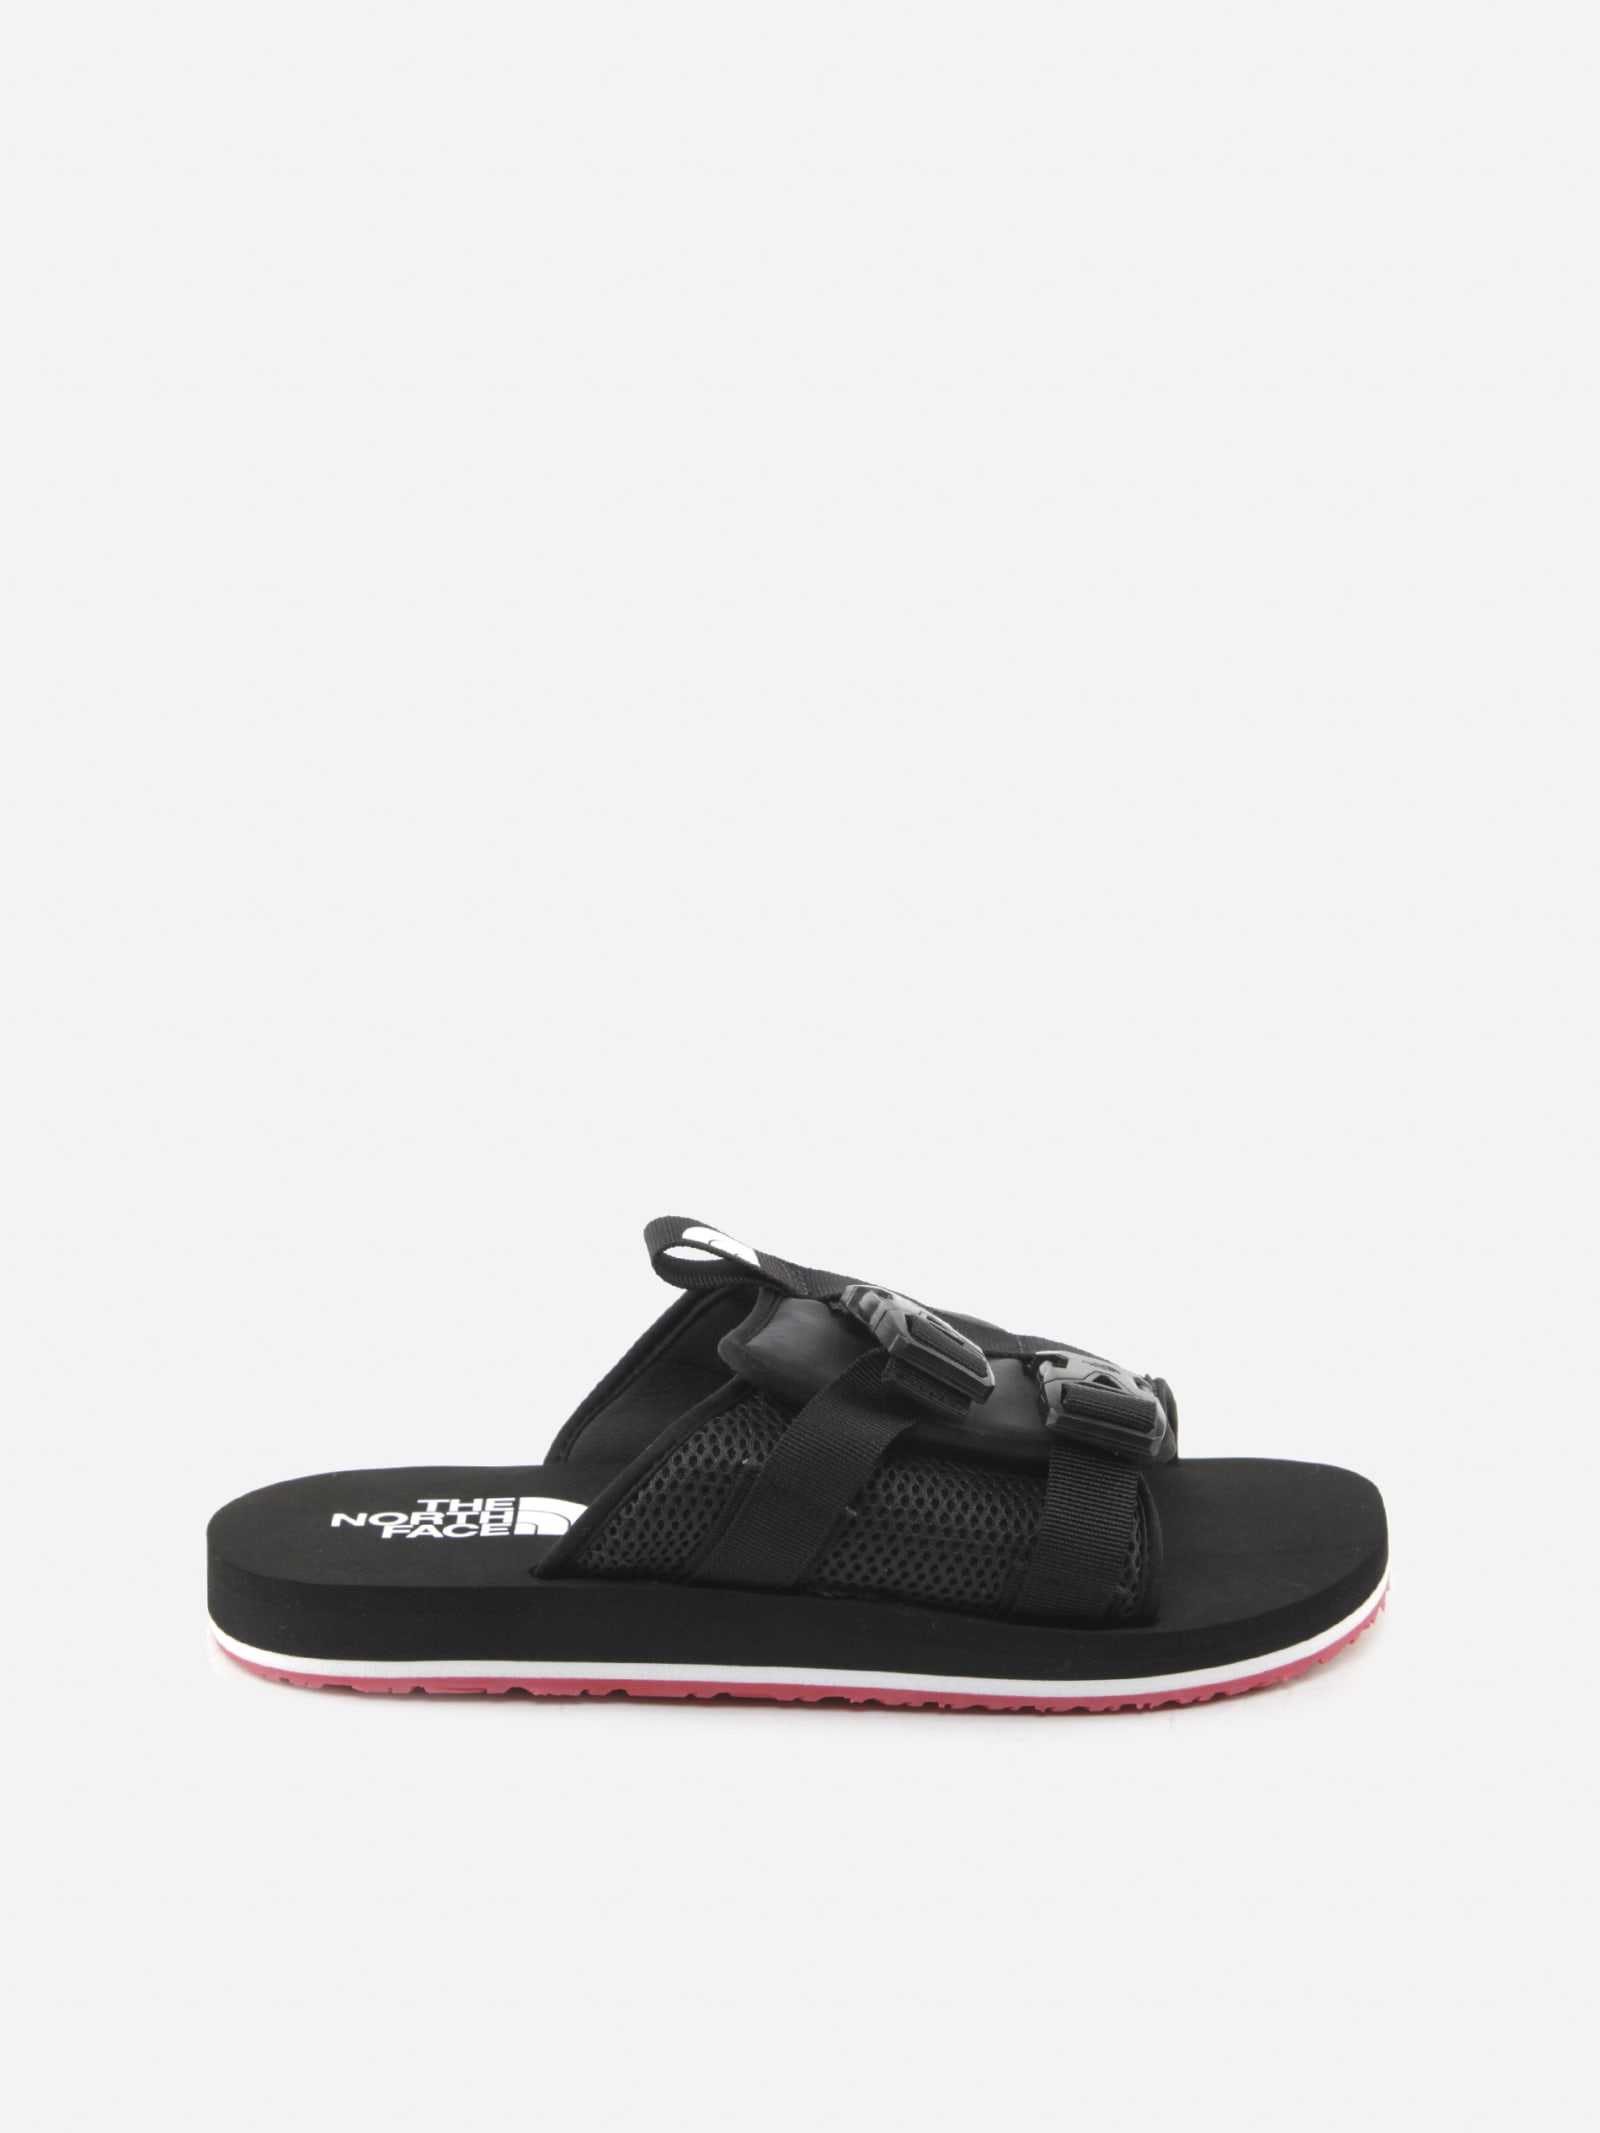 The North Face Black Sandals With Technical Fabric Buckles